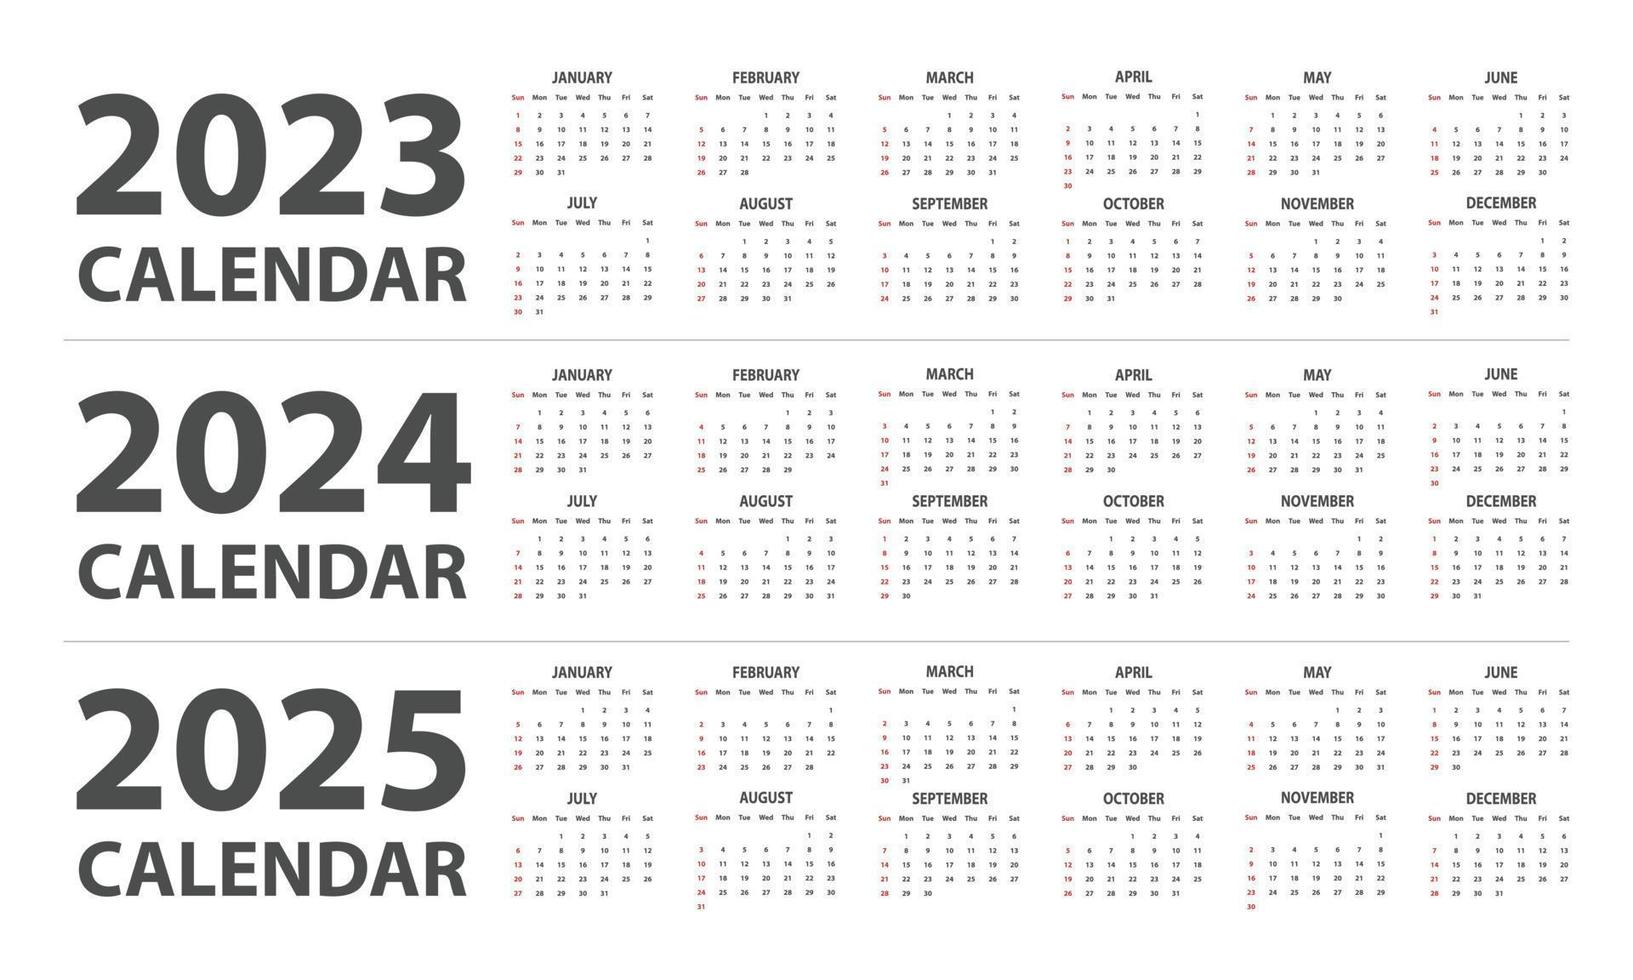 2023, 2024, 2025 calendar vector illustration. Simple classic monthly calendar for years 2023, 2024, 2025. The week starts on Sunday. Minimalist calendar planner year 2023 and 2024 and 2025 template